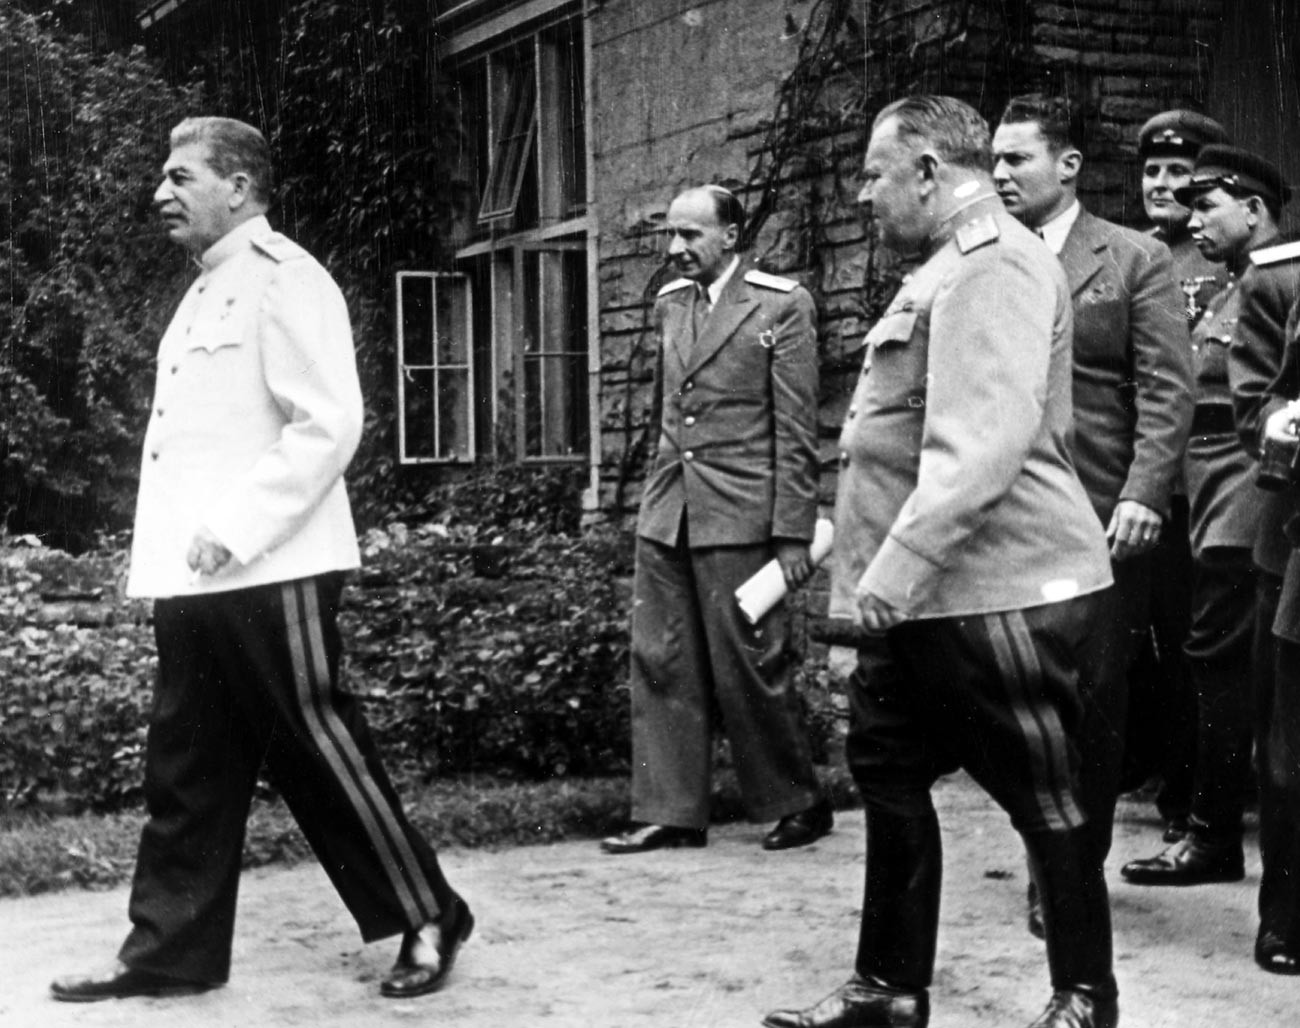 Soviet leader Josef Stalin (R) and his bodyguard Nikolay Vlasik (front left) at Potsdam Conference in July 1945